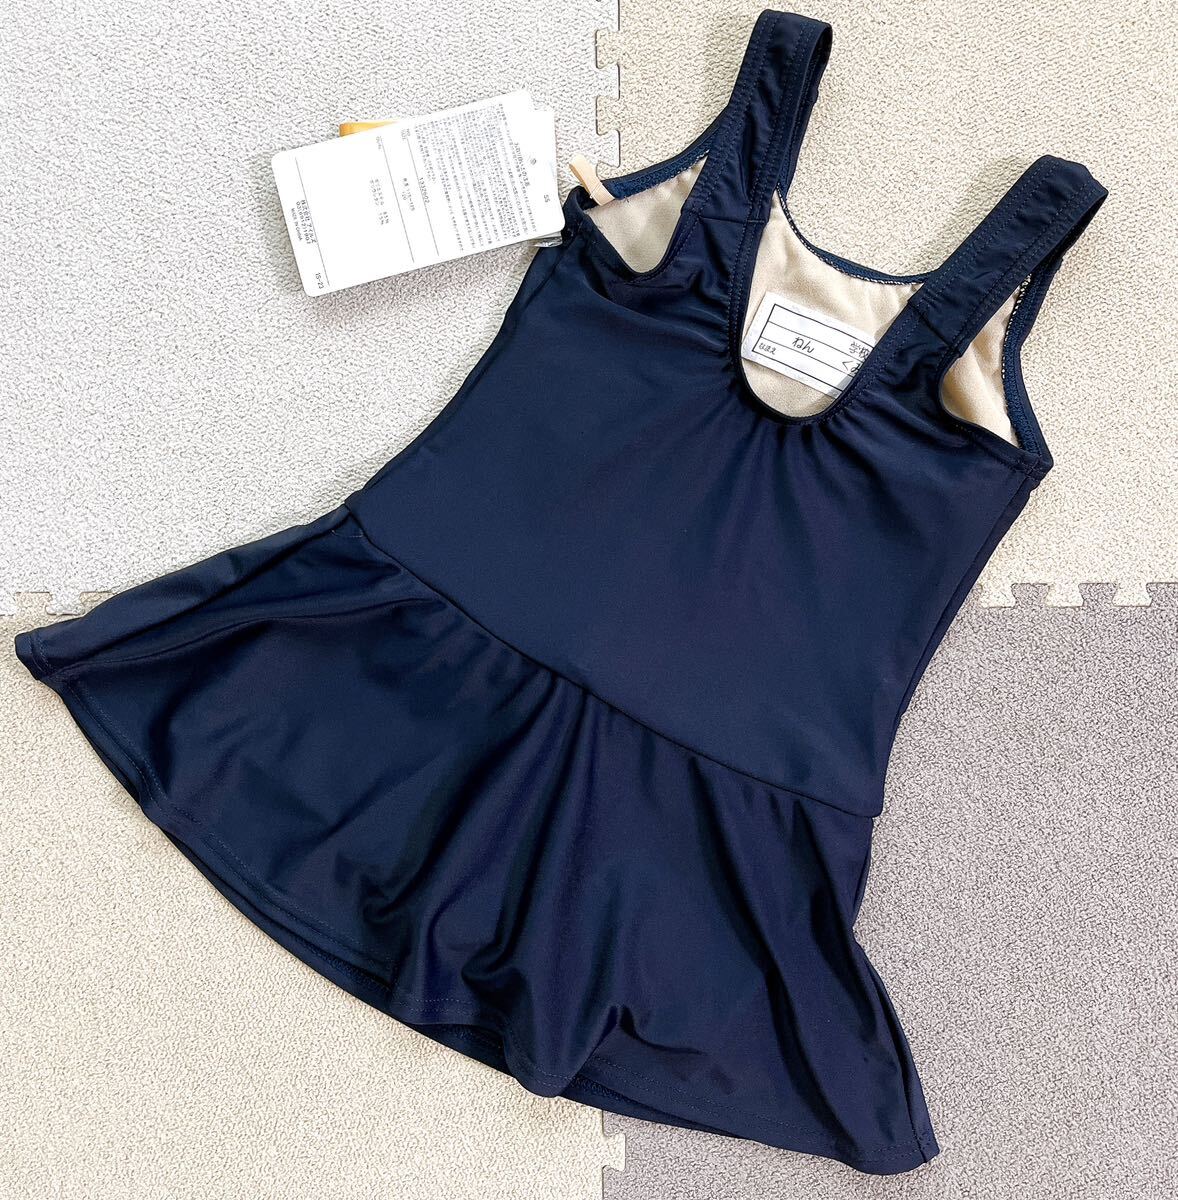  swimsuit / school swimsuit / One-piece / skirt / number attaching /120cm/ new goods / tag attaching / navy / dark blue / girl / child / plain / pool / elementary school student / anonymity delivery 